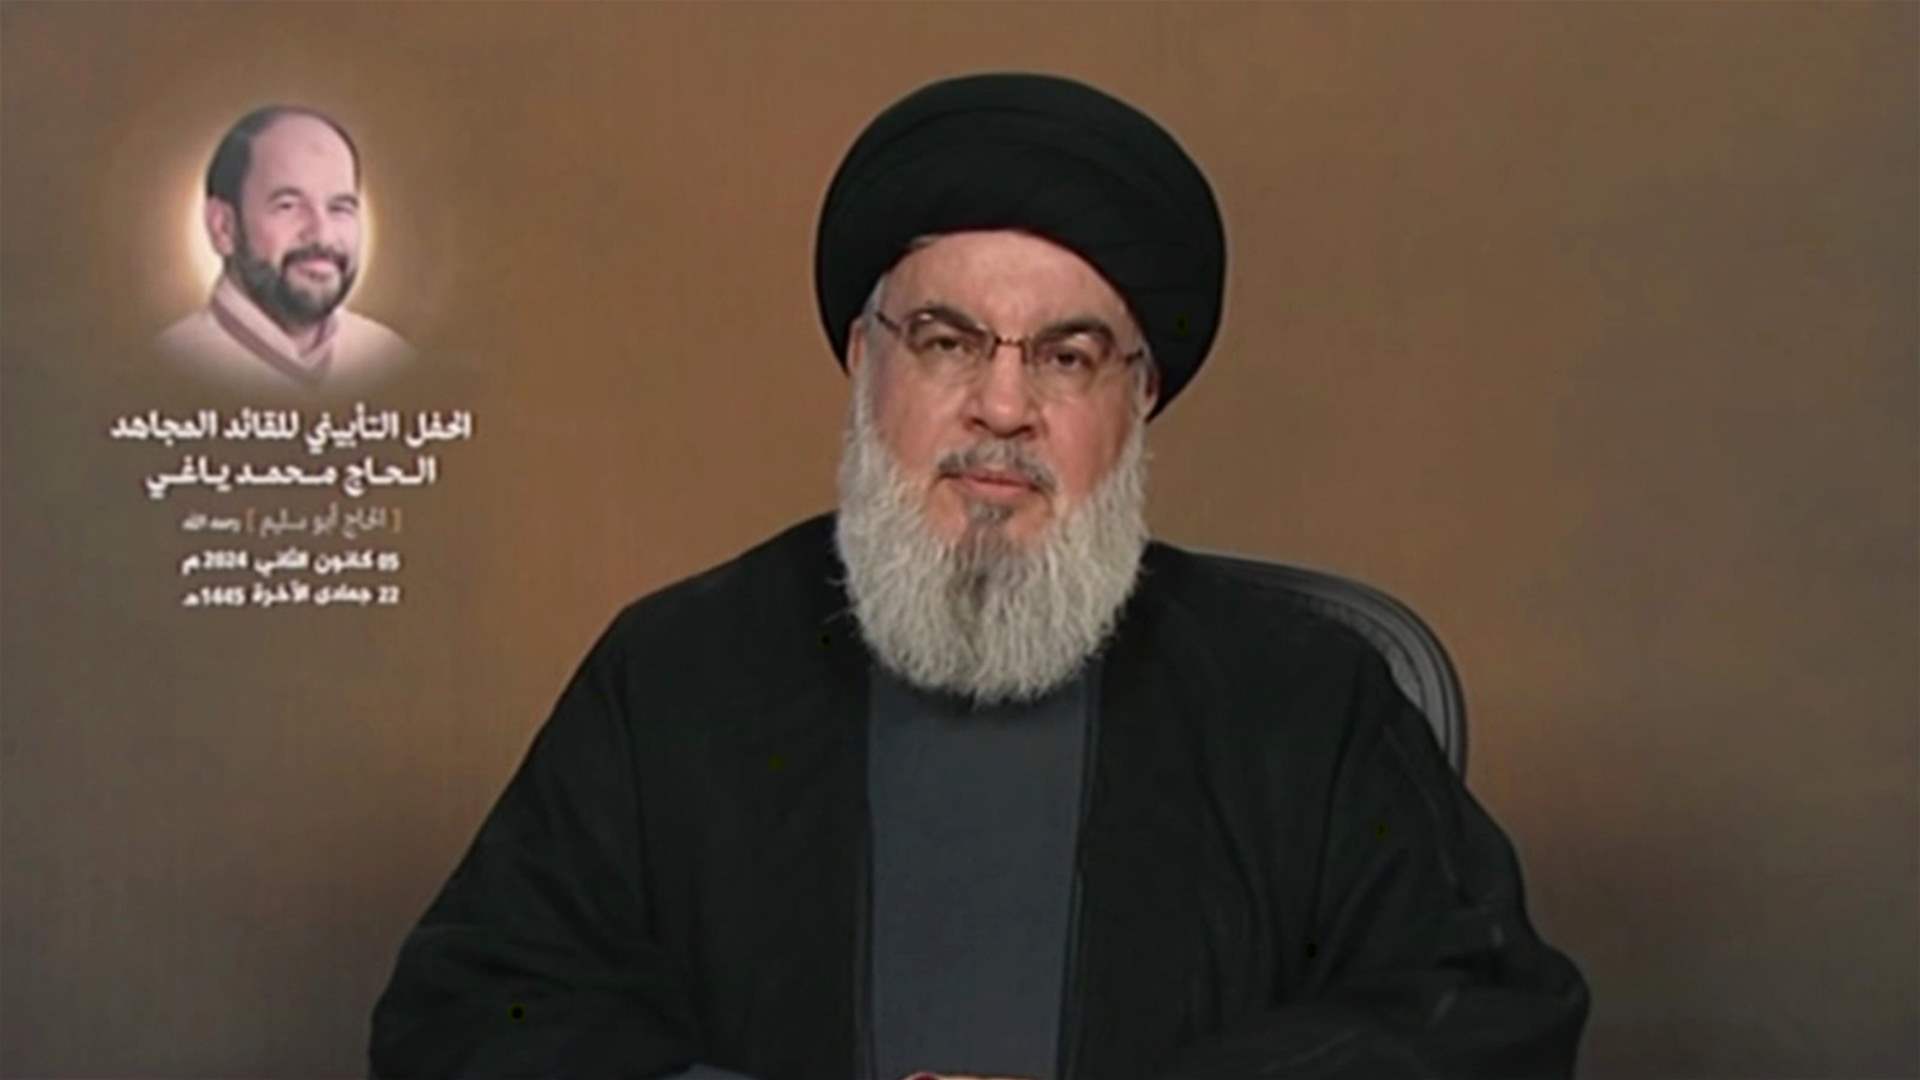 Hezbollah Leader Nasrallah: Targeting of Al-Arouri will not go unanswered, there is real opportunity to liberate occupied Lebanese territories